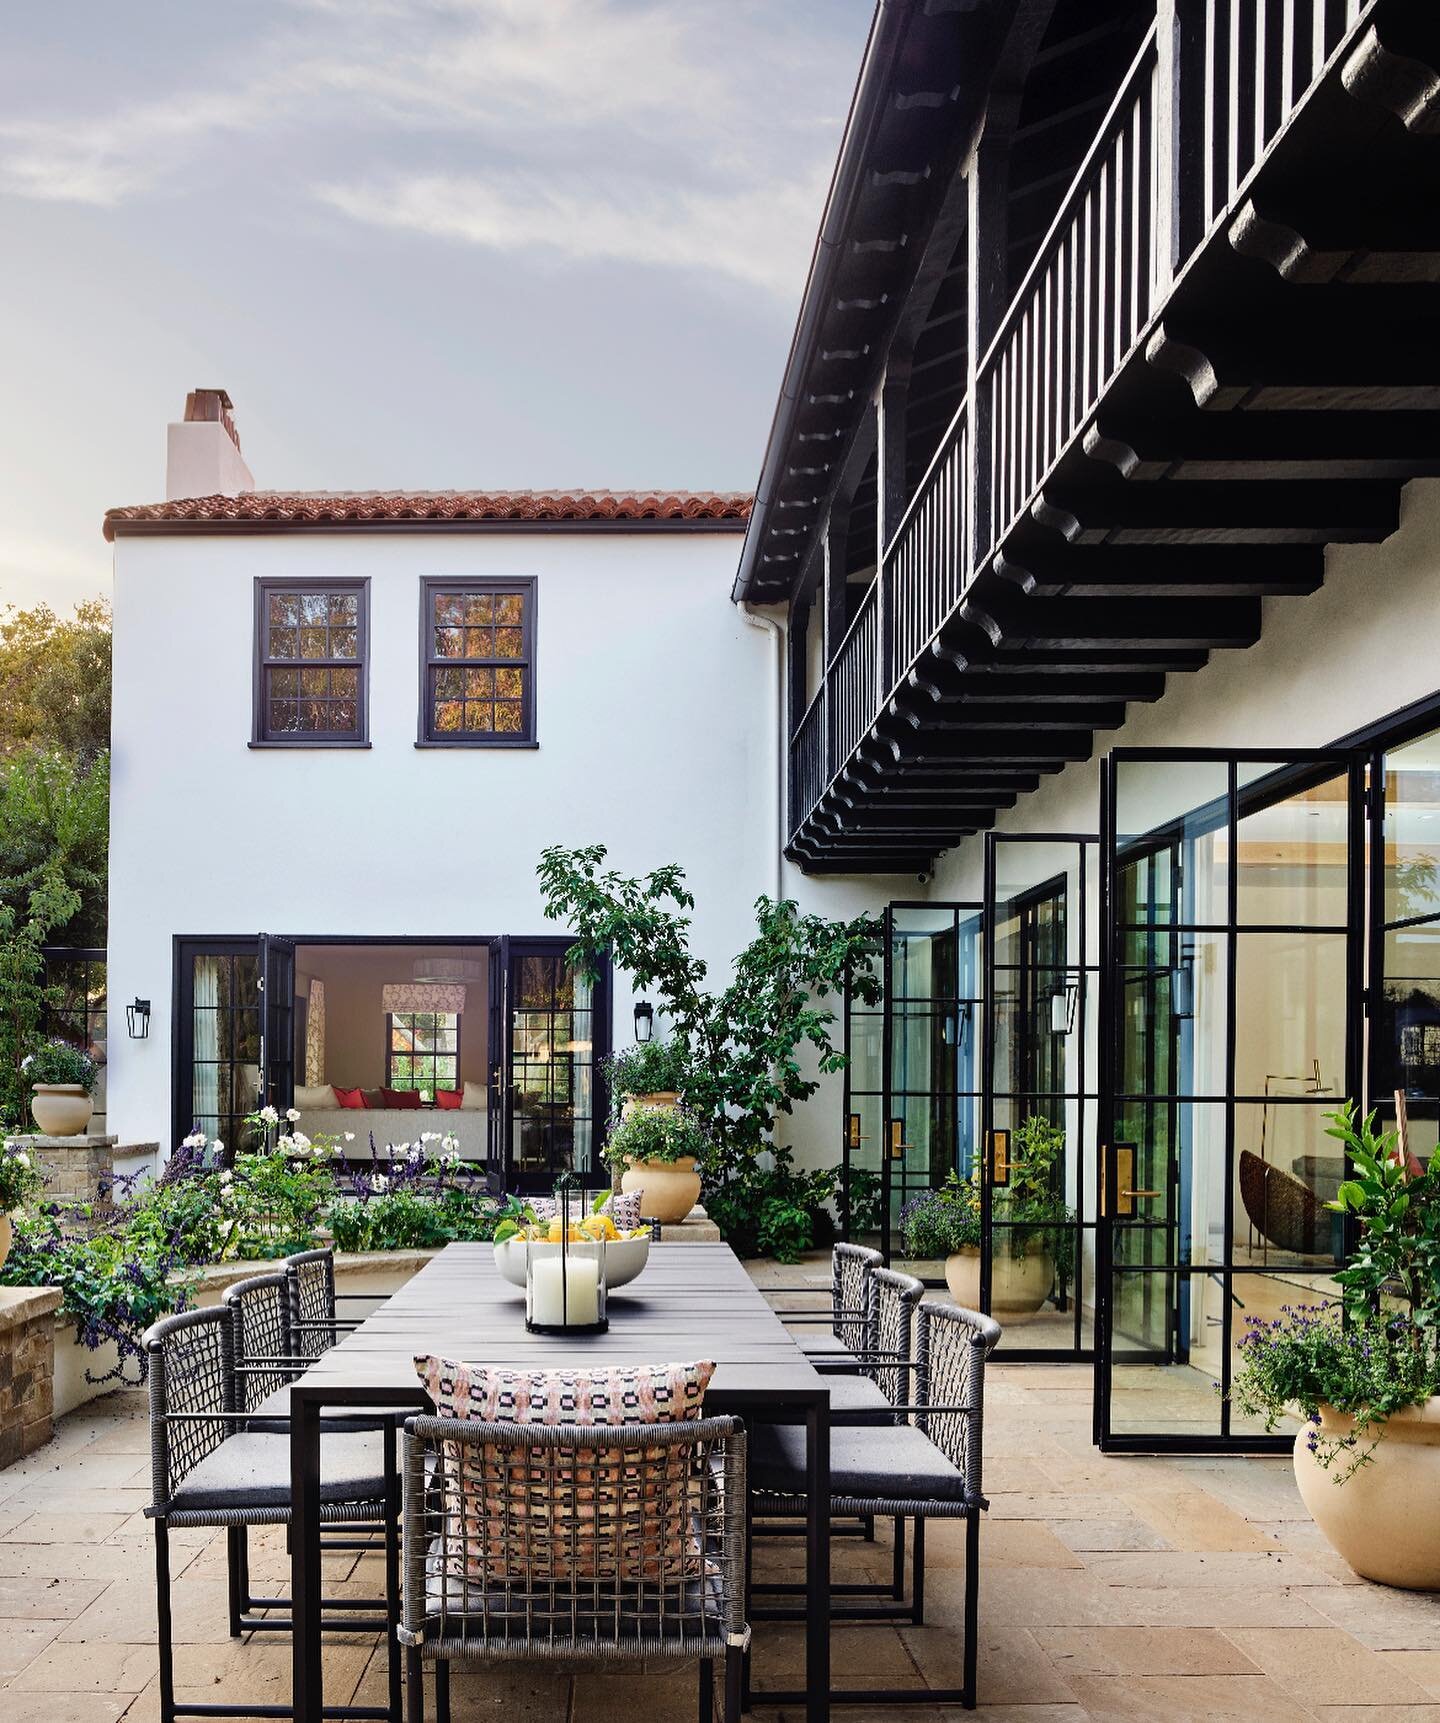 So much style and substance to celebrate in this gorgeous Spanish Colonial renovation by clients @fergusgarber and @mansfieldoneil. Thank you @punchmonthly for the beautiful feature in your new February issue! 

Architecture: @fergusgarber 
Interior 